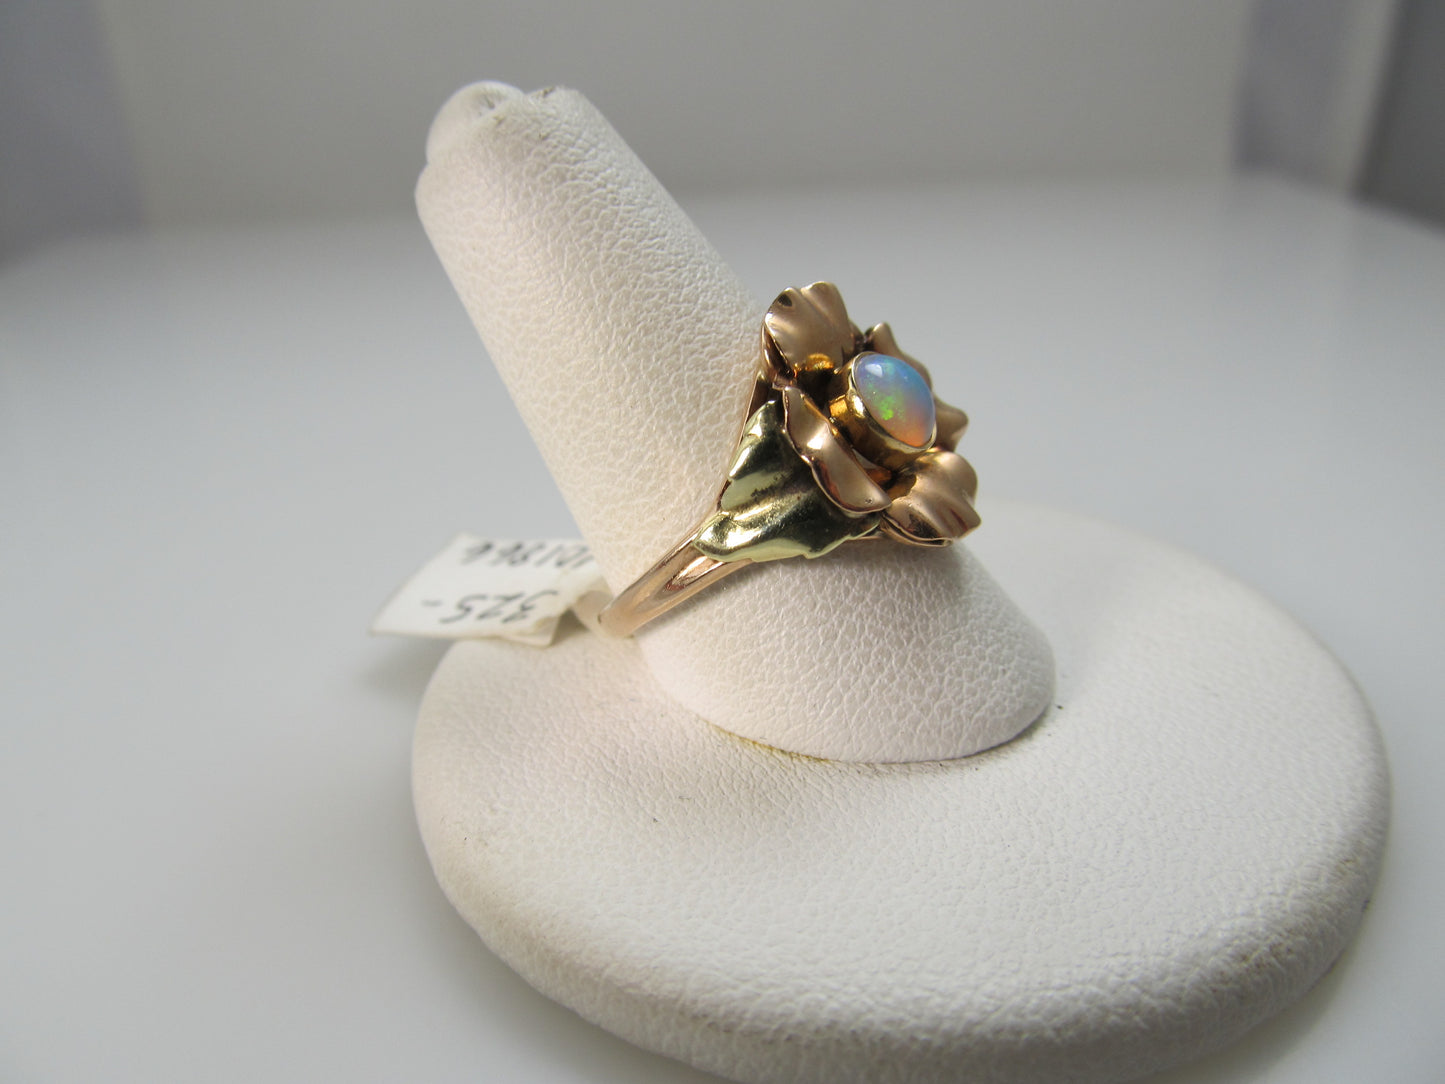 Vintage 14k Rose Gold Ring With An Opal, Circa 1940.